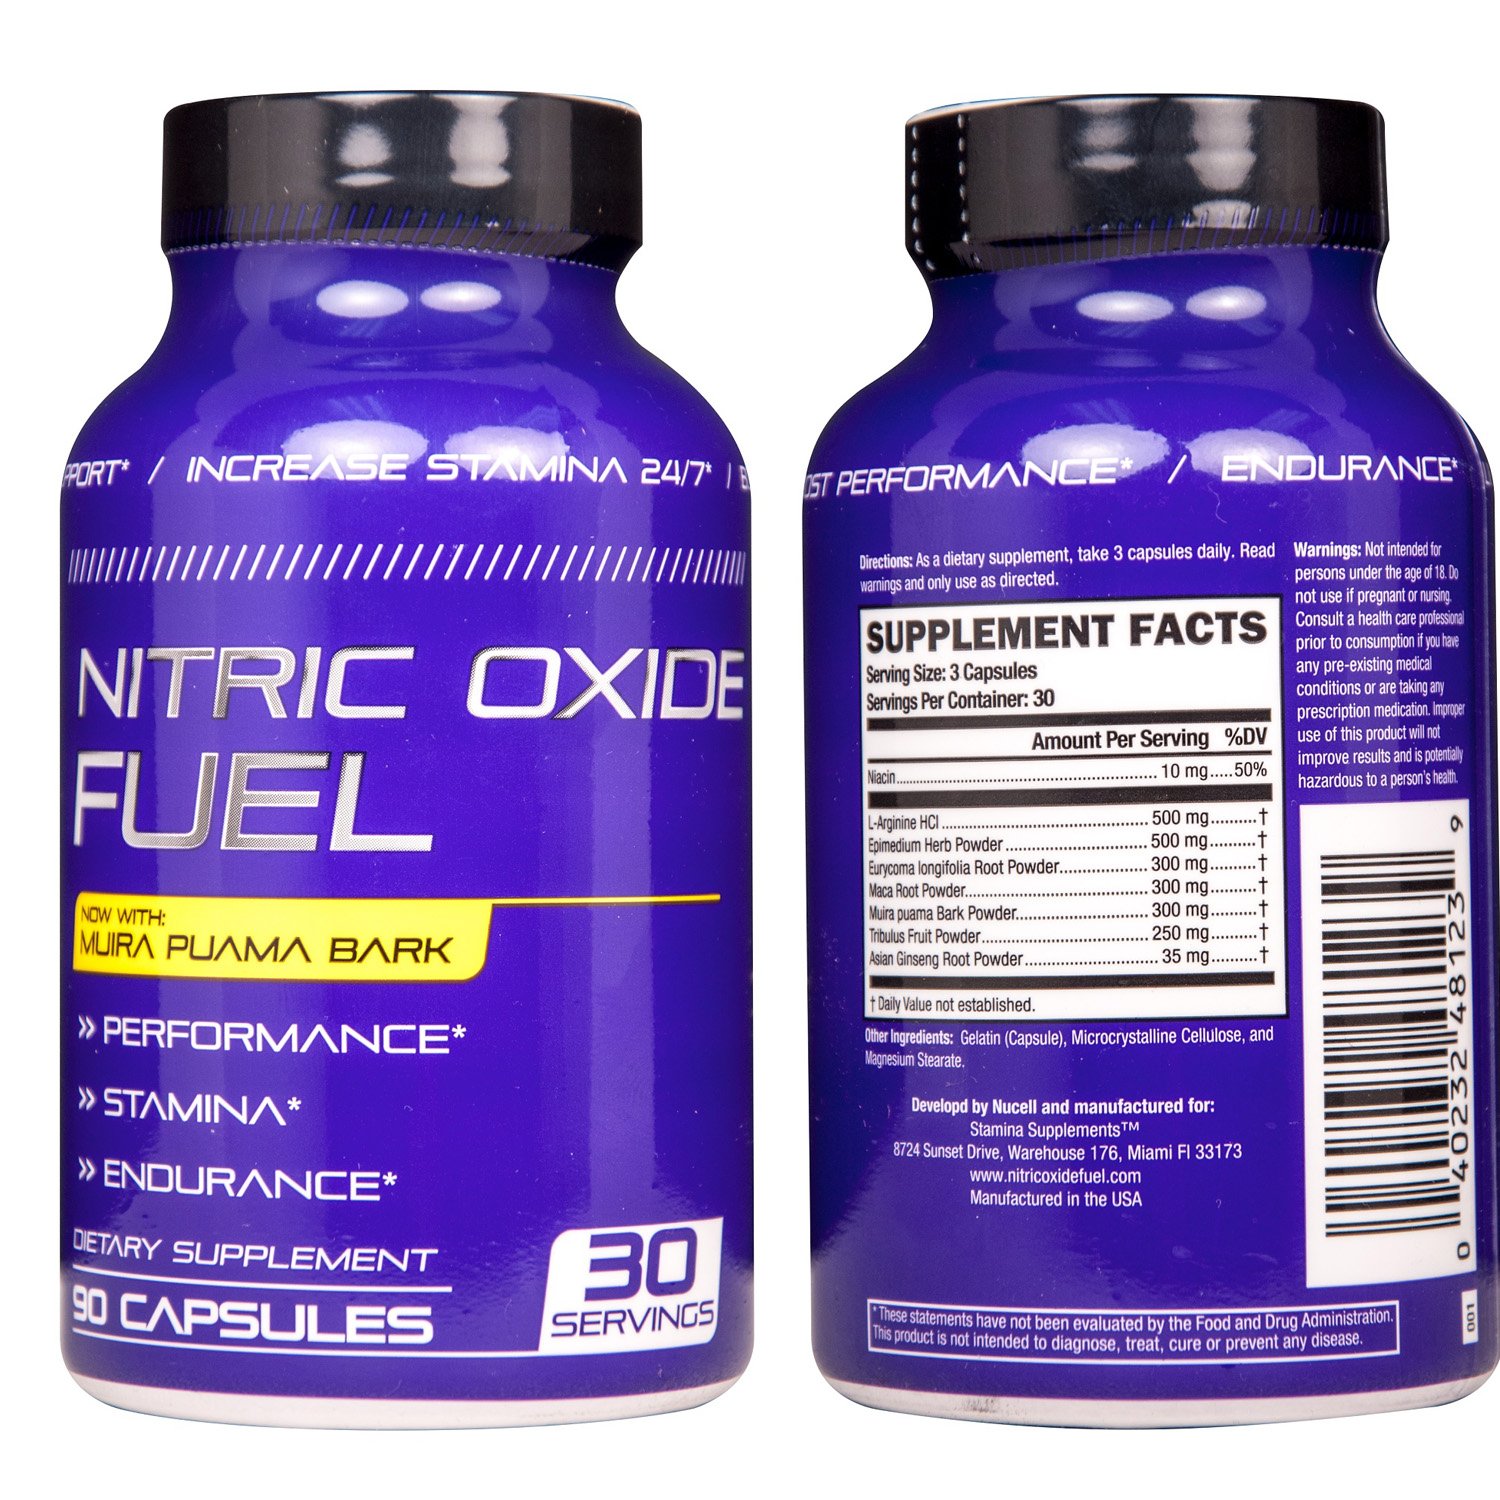 Nitric Oxide Fuel - Nitric Oxide Complex for Stamina Endurance Size & Physical Performance - Maca, Tribilus, Ginseng & Essential Amino Acids to Boost Stamina, 90 Caps Made USA